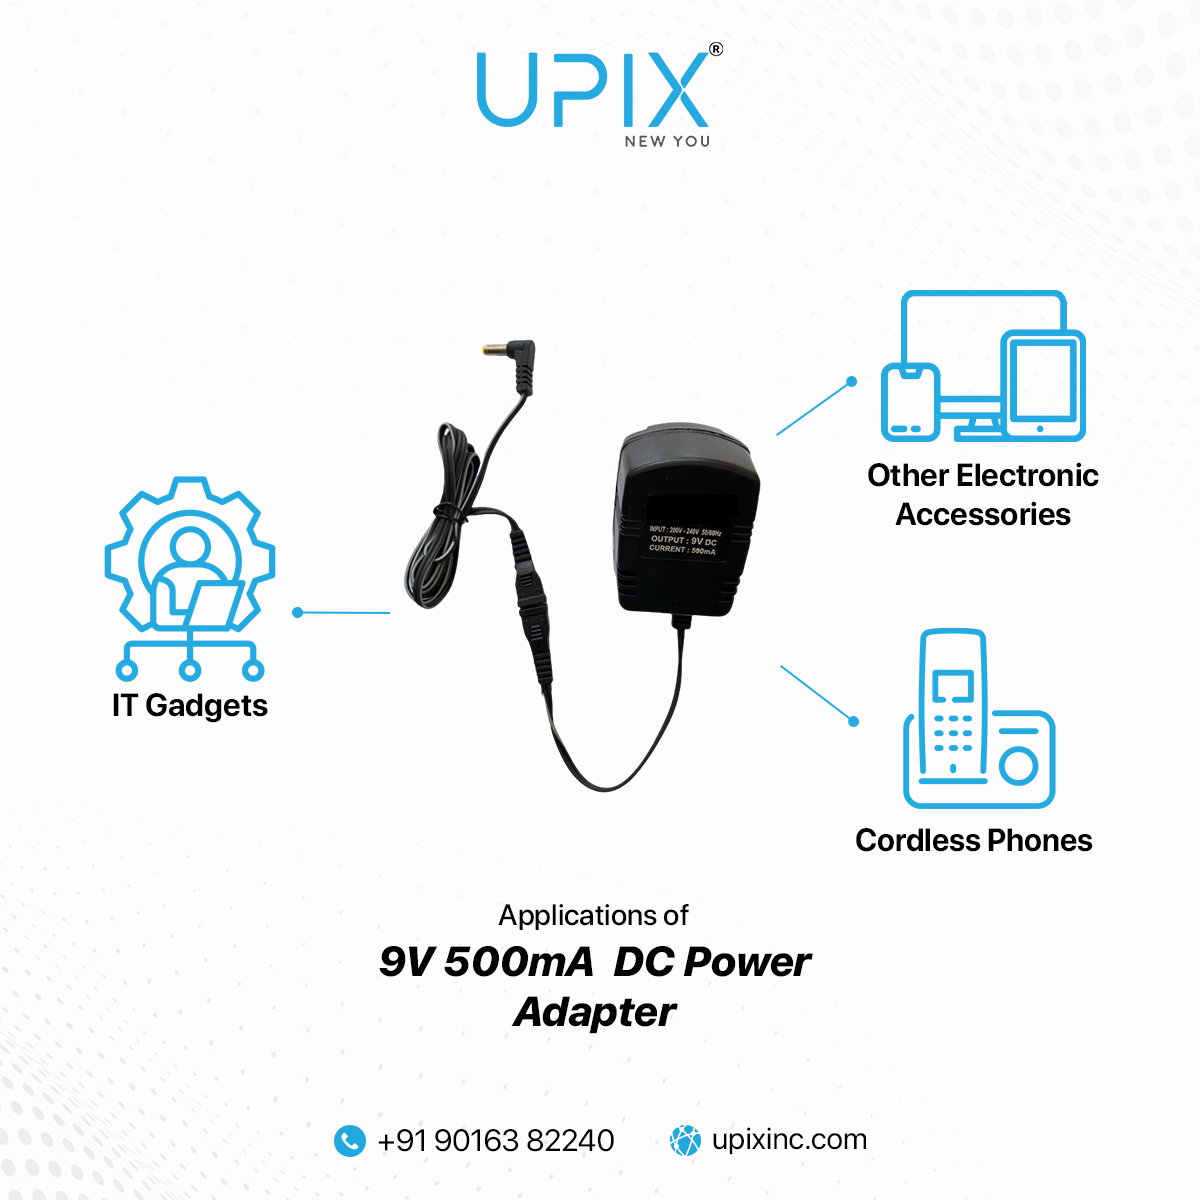 Reliability meets efficiency with our 9V 500mA DC Power Adapter from Upix®️. Trust in quality, trust in performance.
.
To know more, visit- upixinc.com or WhatsApp Now wa.me/919016382240
.
#upixinc #ContinuousPower #FastCharging #ReliableCharging #FastCharge